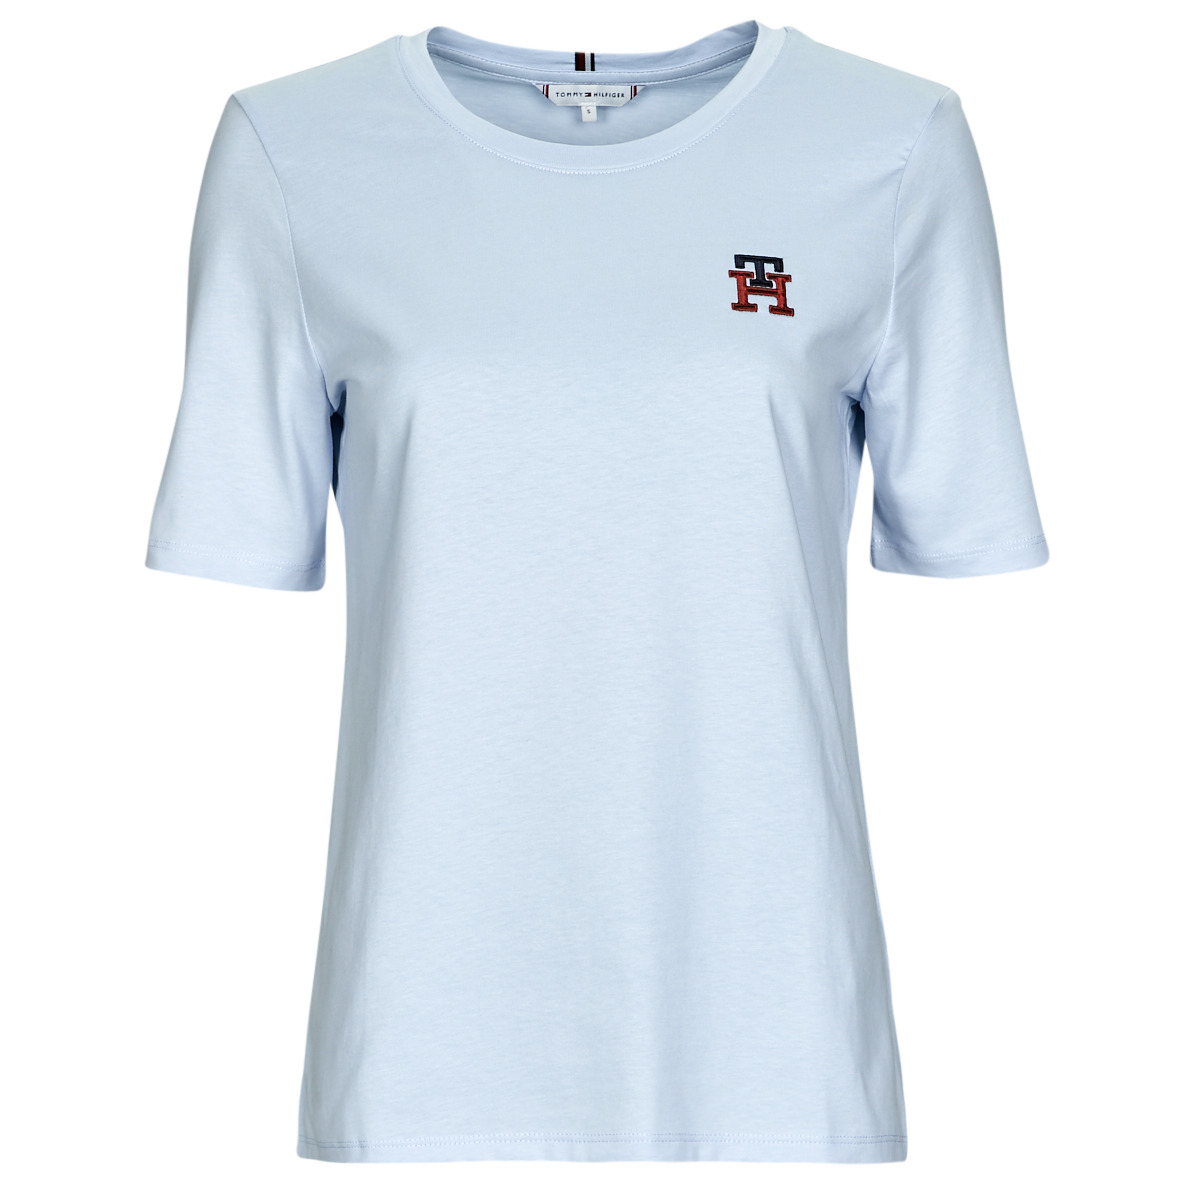 Tommy Hilfiger REG EMB short-sleeved Spartoo Europe SS Clothing C-NK / Blue Sky t-shirts | Fast delivery MONOGRAM 44,00 - € Women - 